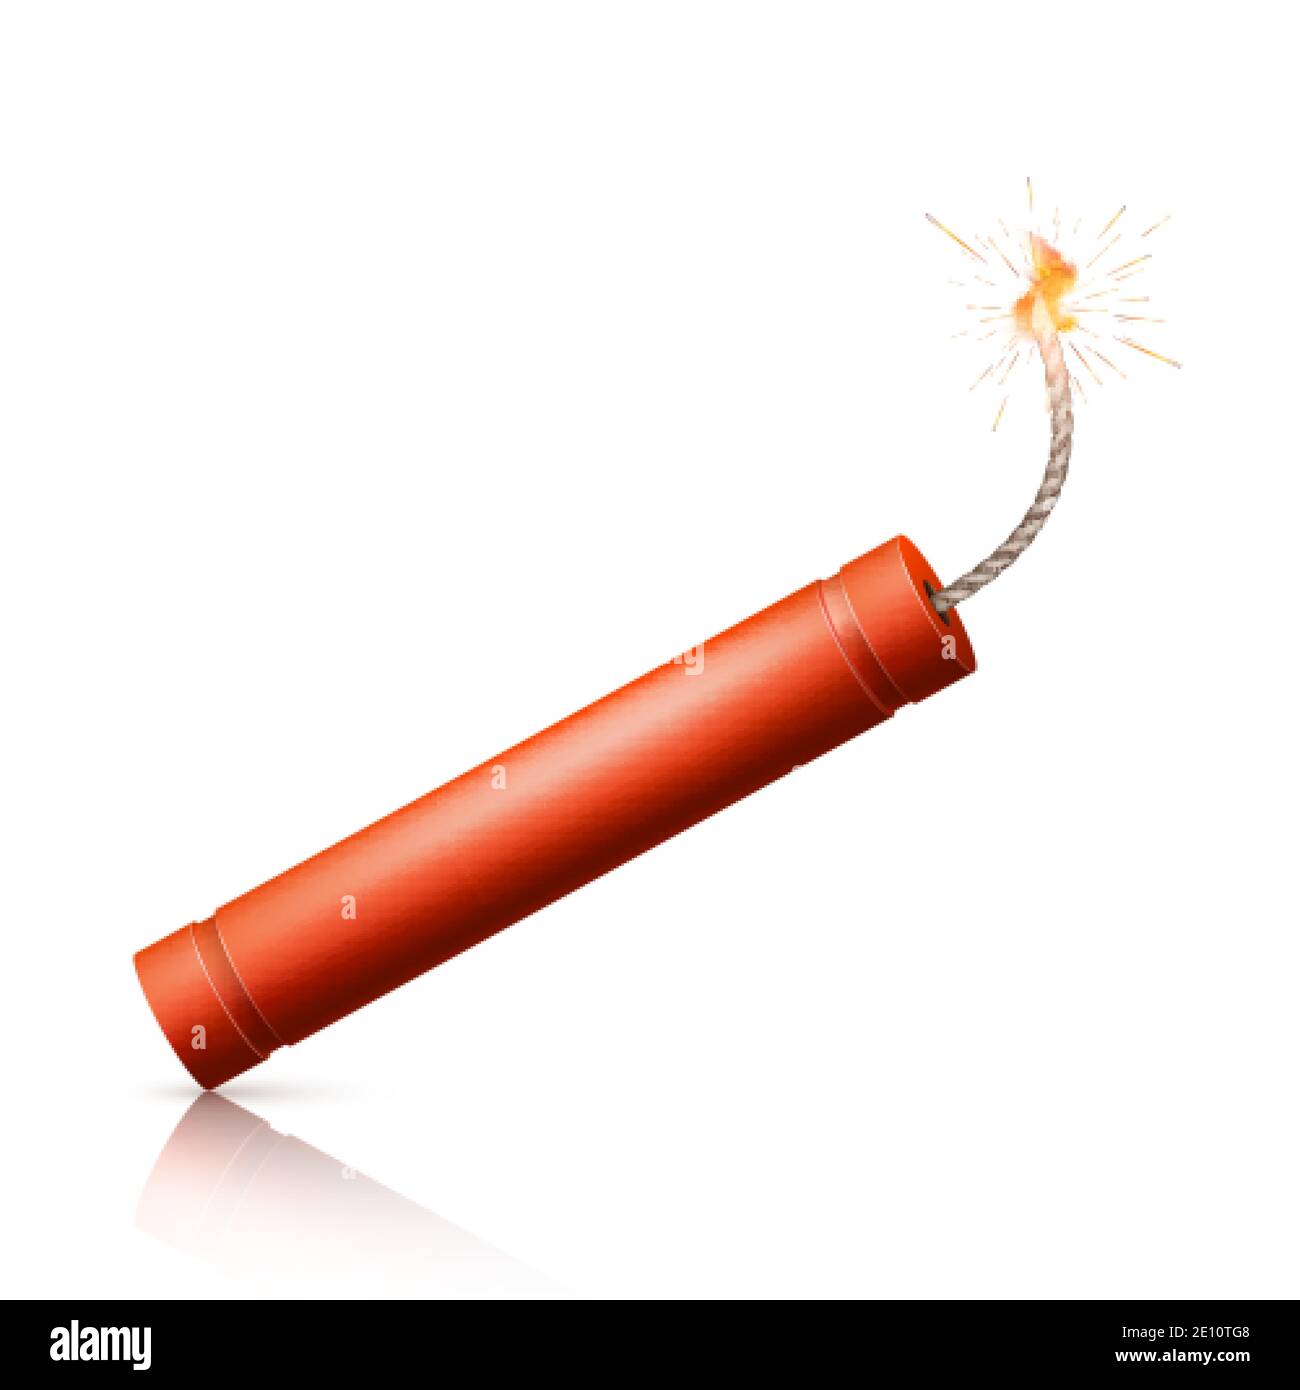 Dynamite Bomb with Burning Wick. Military Detonate Red Weapon. Vector illustration Stock Vector